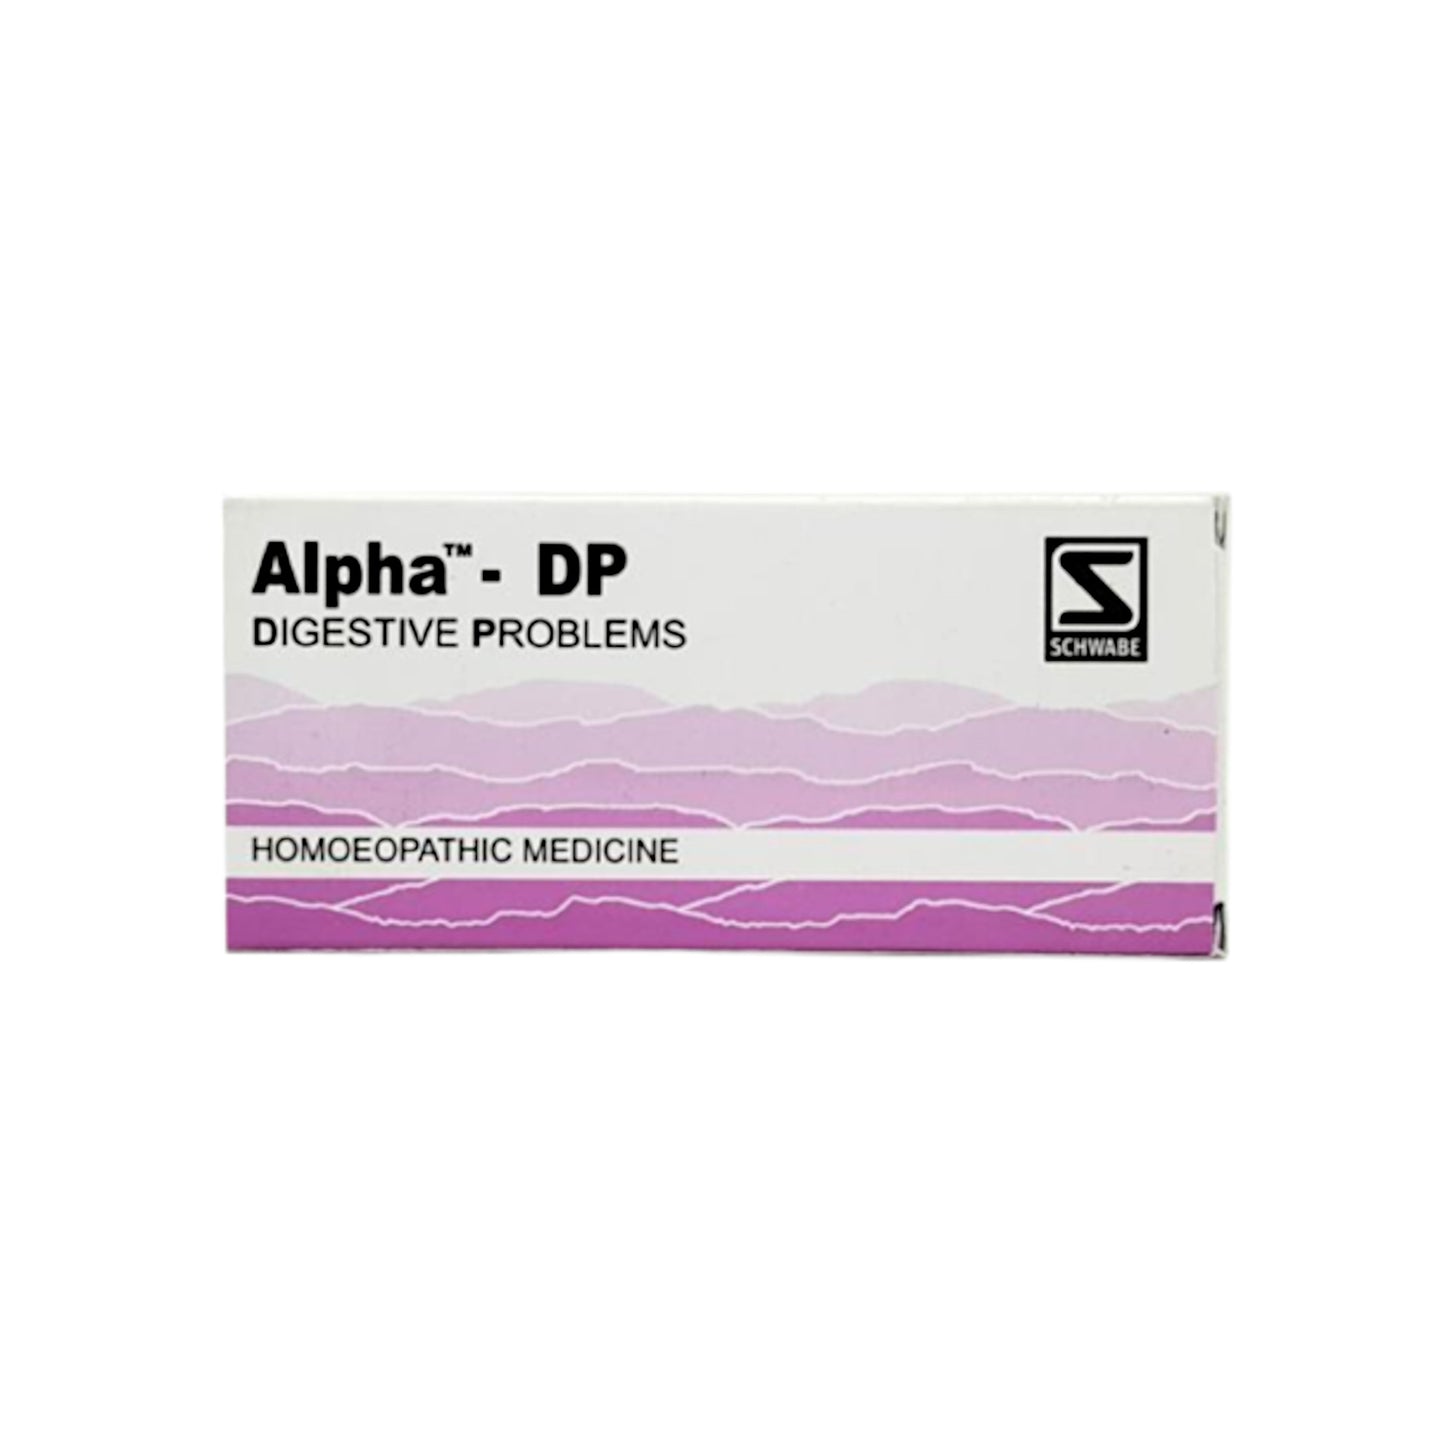 Dr. Schwabe Homeopathy - Alpha-DP 40 Tablets